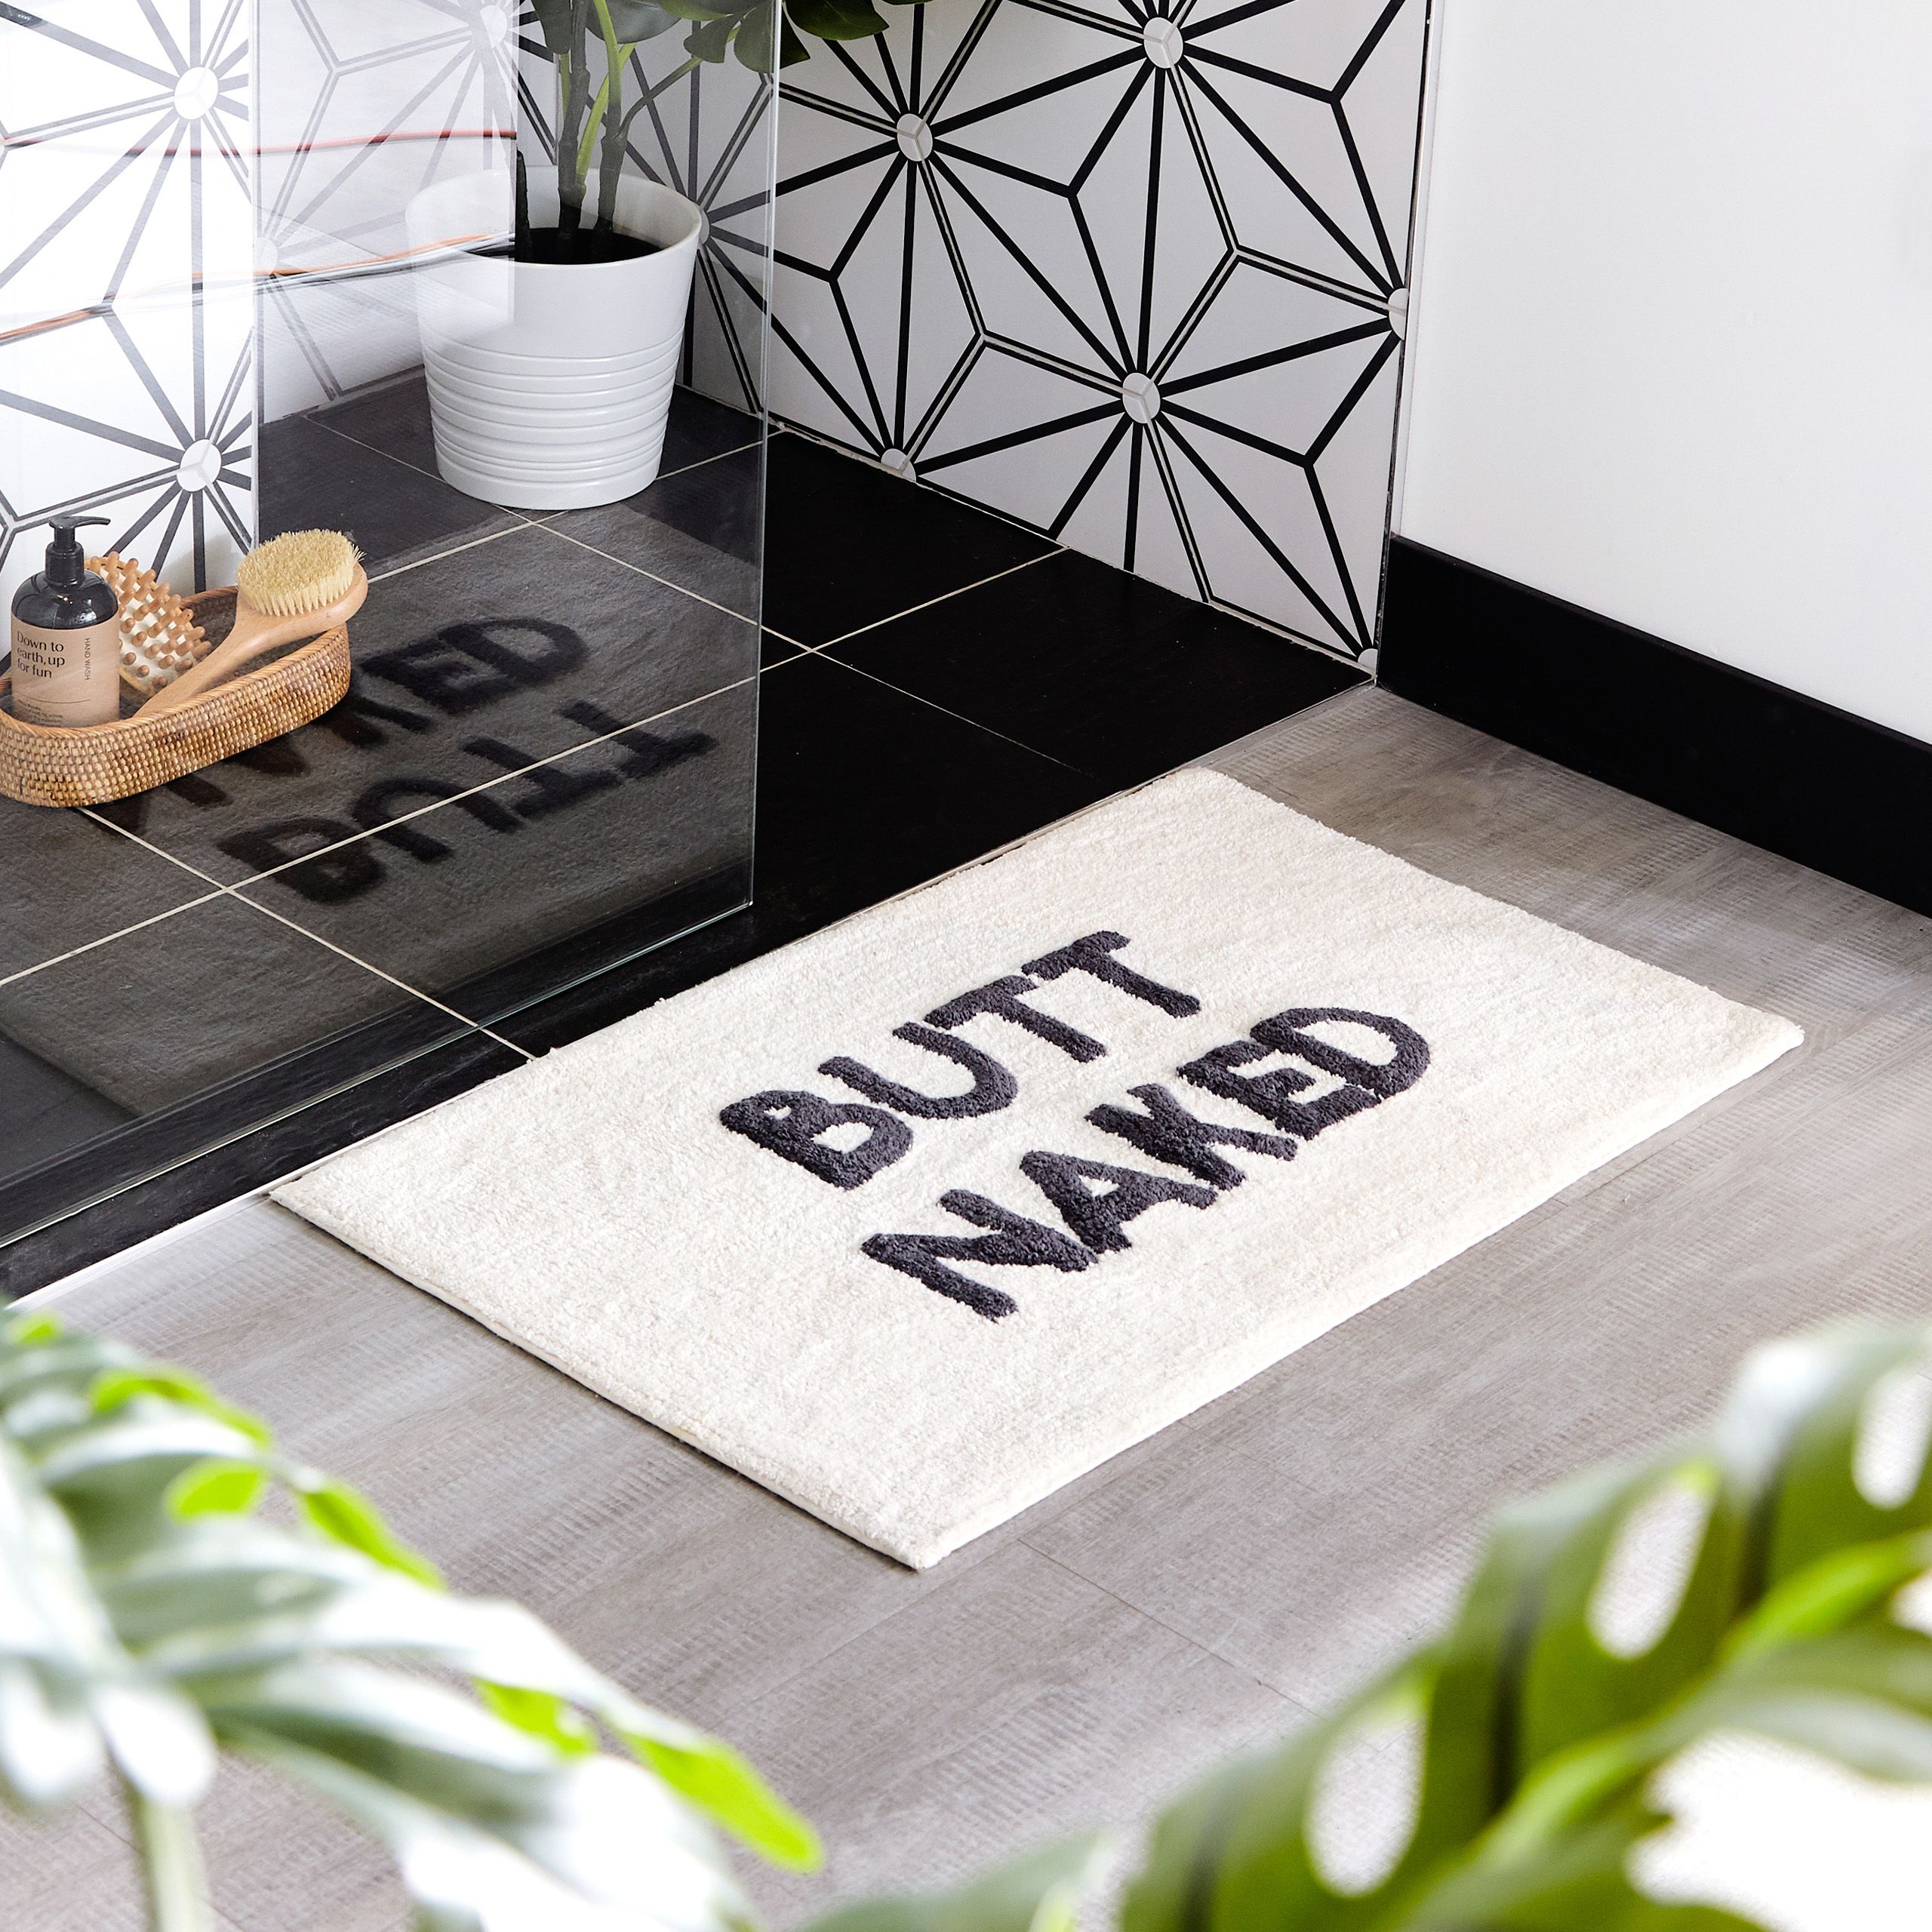 Featuring a 'Butt Naked' contrasting slogan, on a tufted ivory white fabric. Made from 100% Cotton, making this bath mat incredibly soft under foot. This bath mat has an anti-slip quality, keeping it securely in place on your bathroom floor. The 1800 GSM ensures this bath mat is super absorbent preventing post-bath or shower puddles.